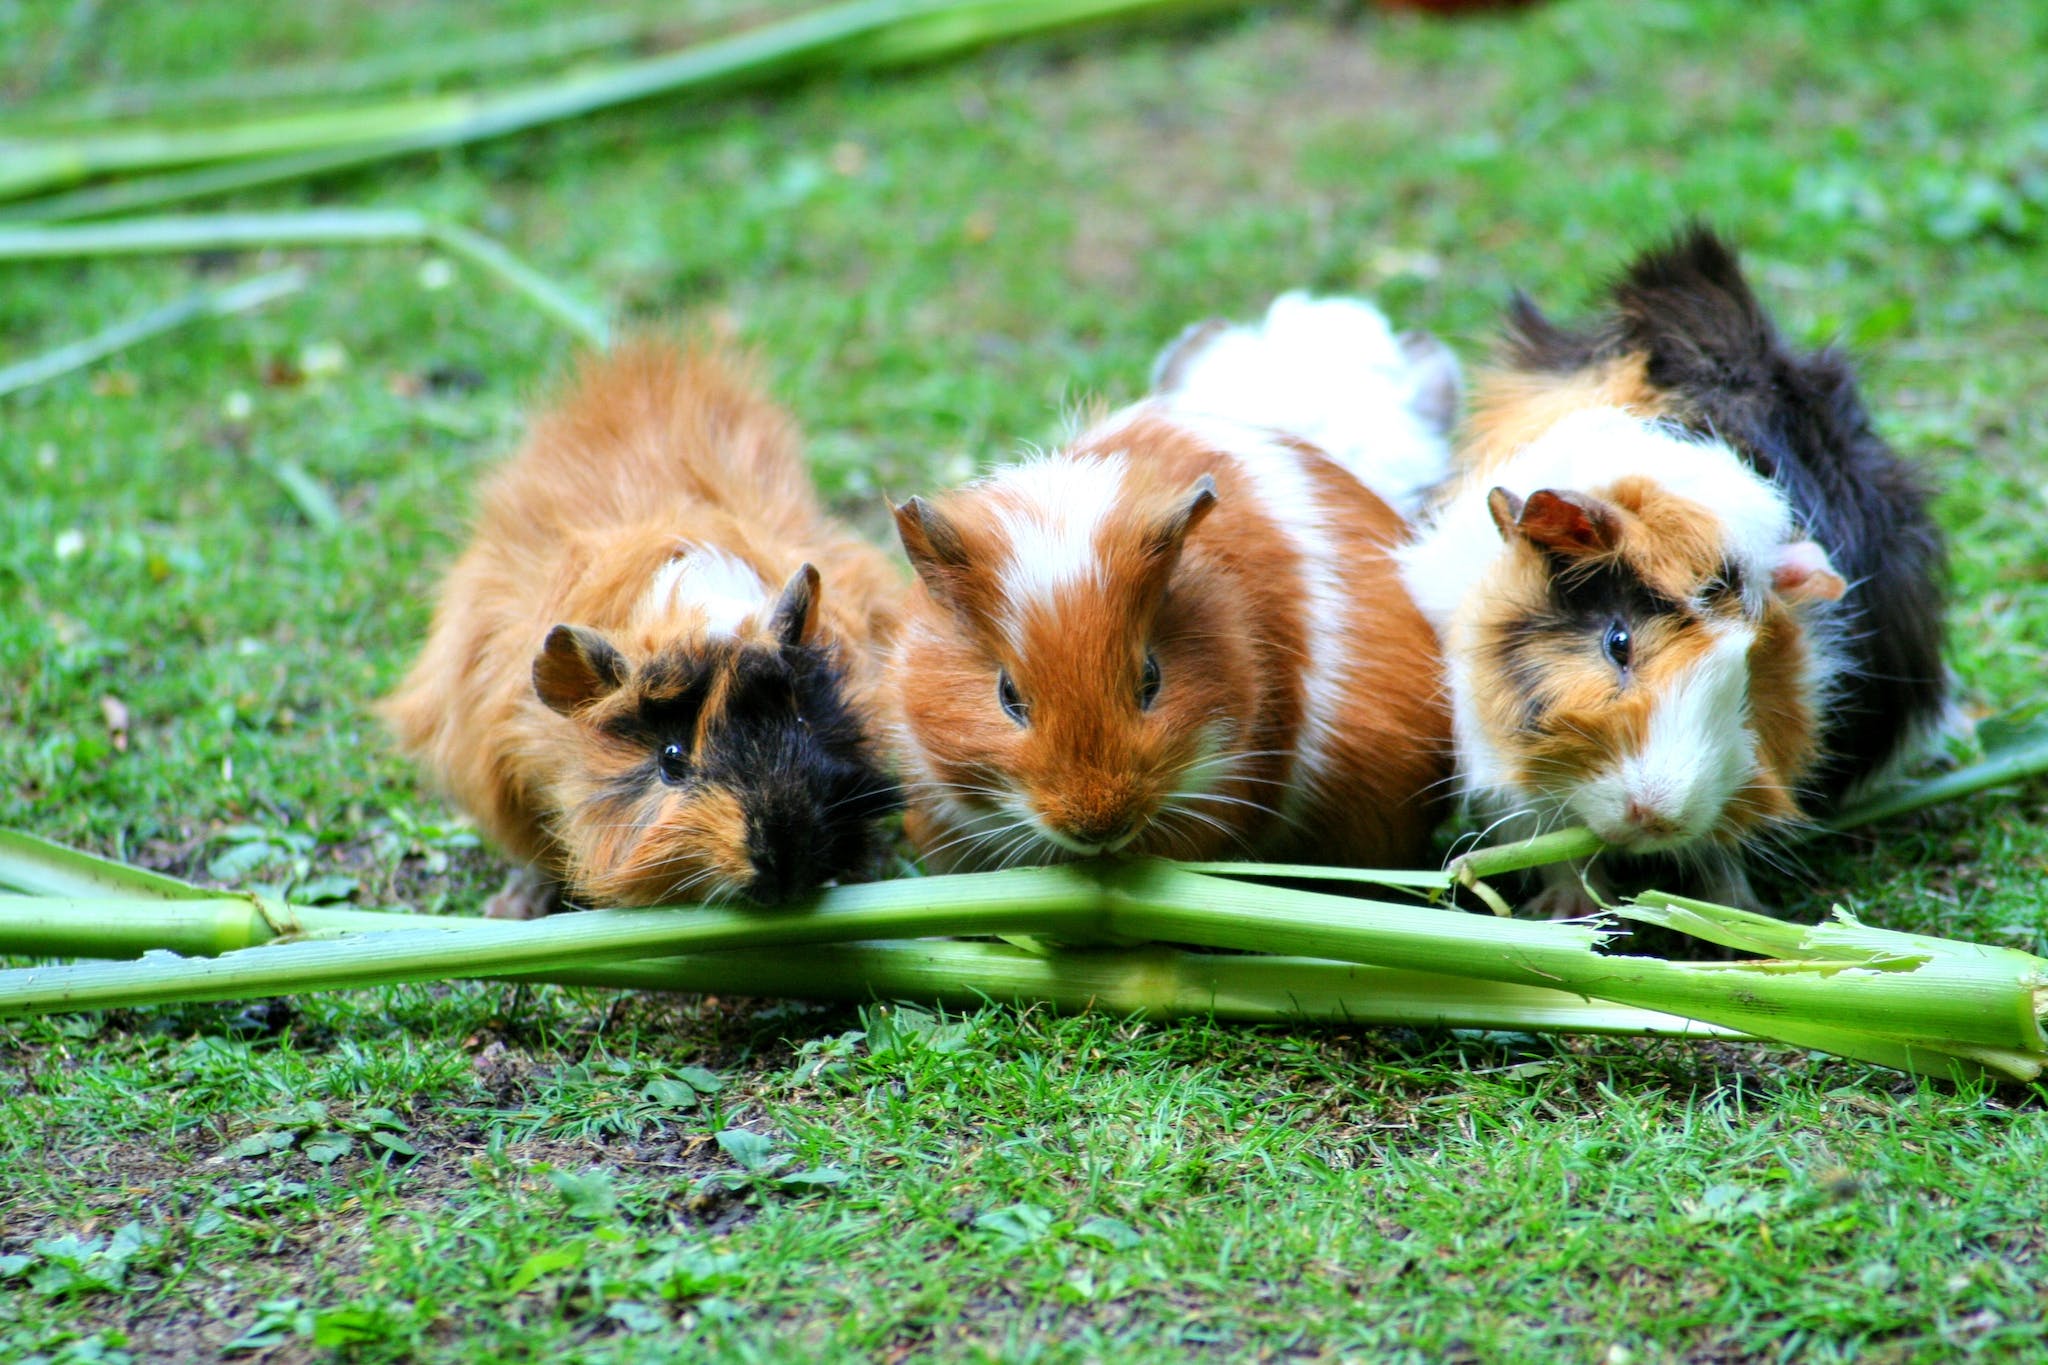 How Many Teeth Do Guinea Pigs Have?